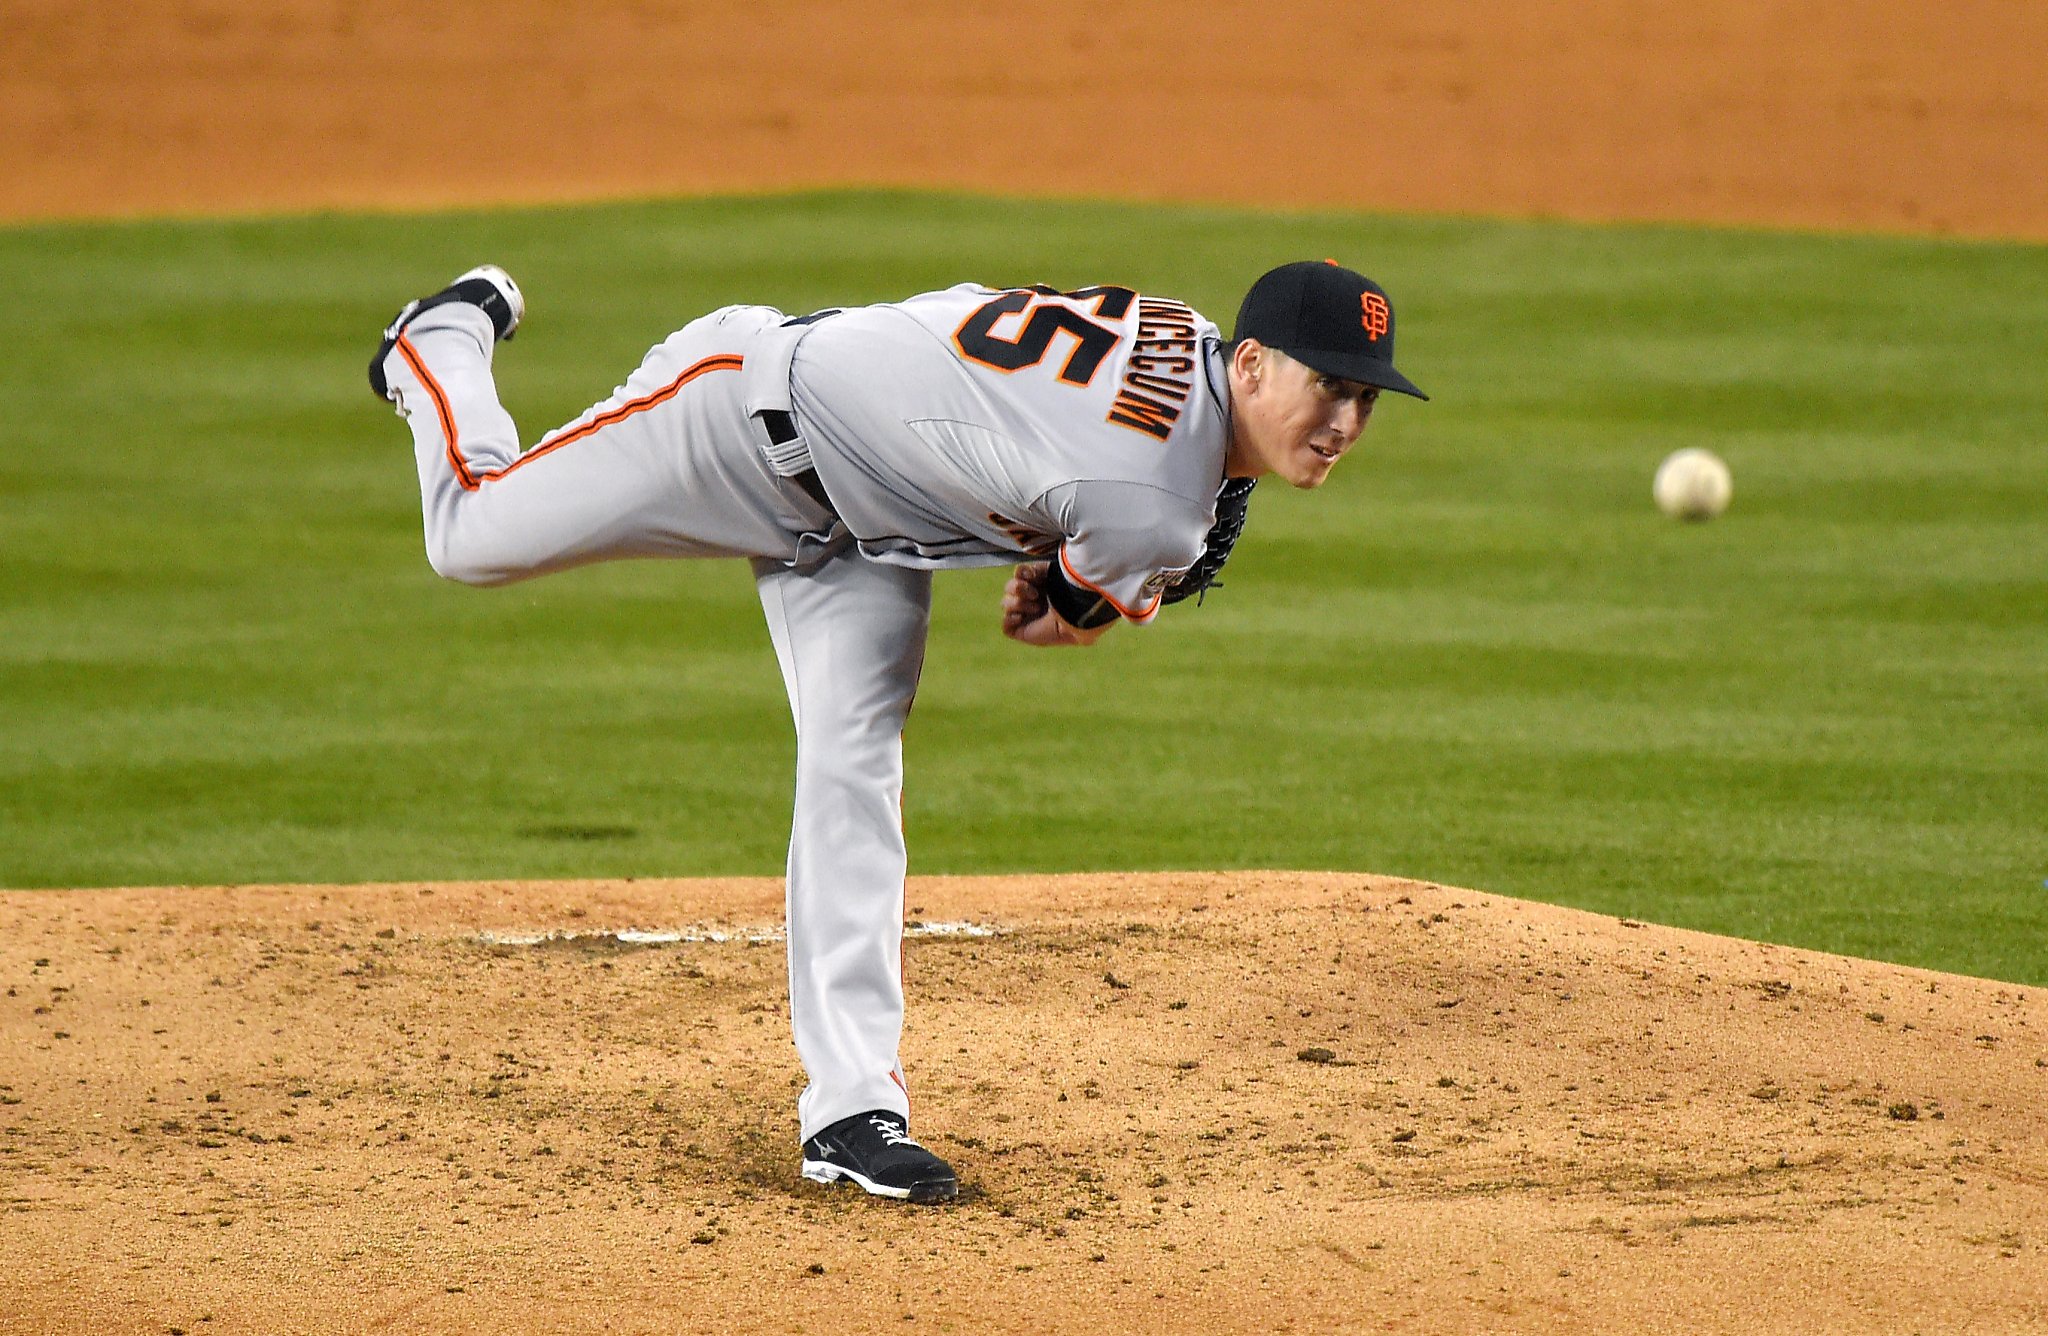 Giants spring training: Lincecum looking like a starter under